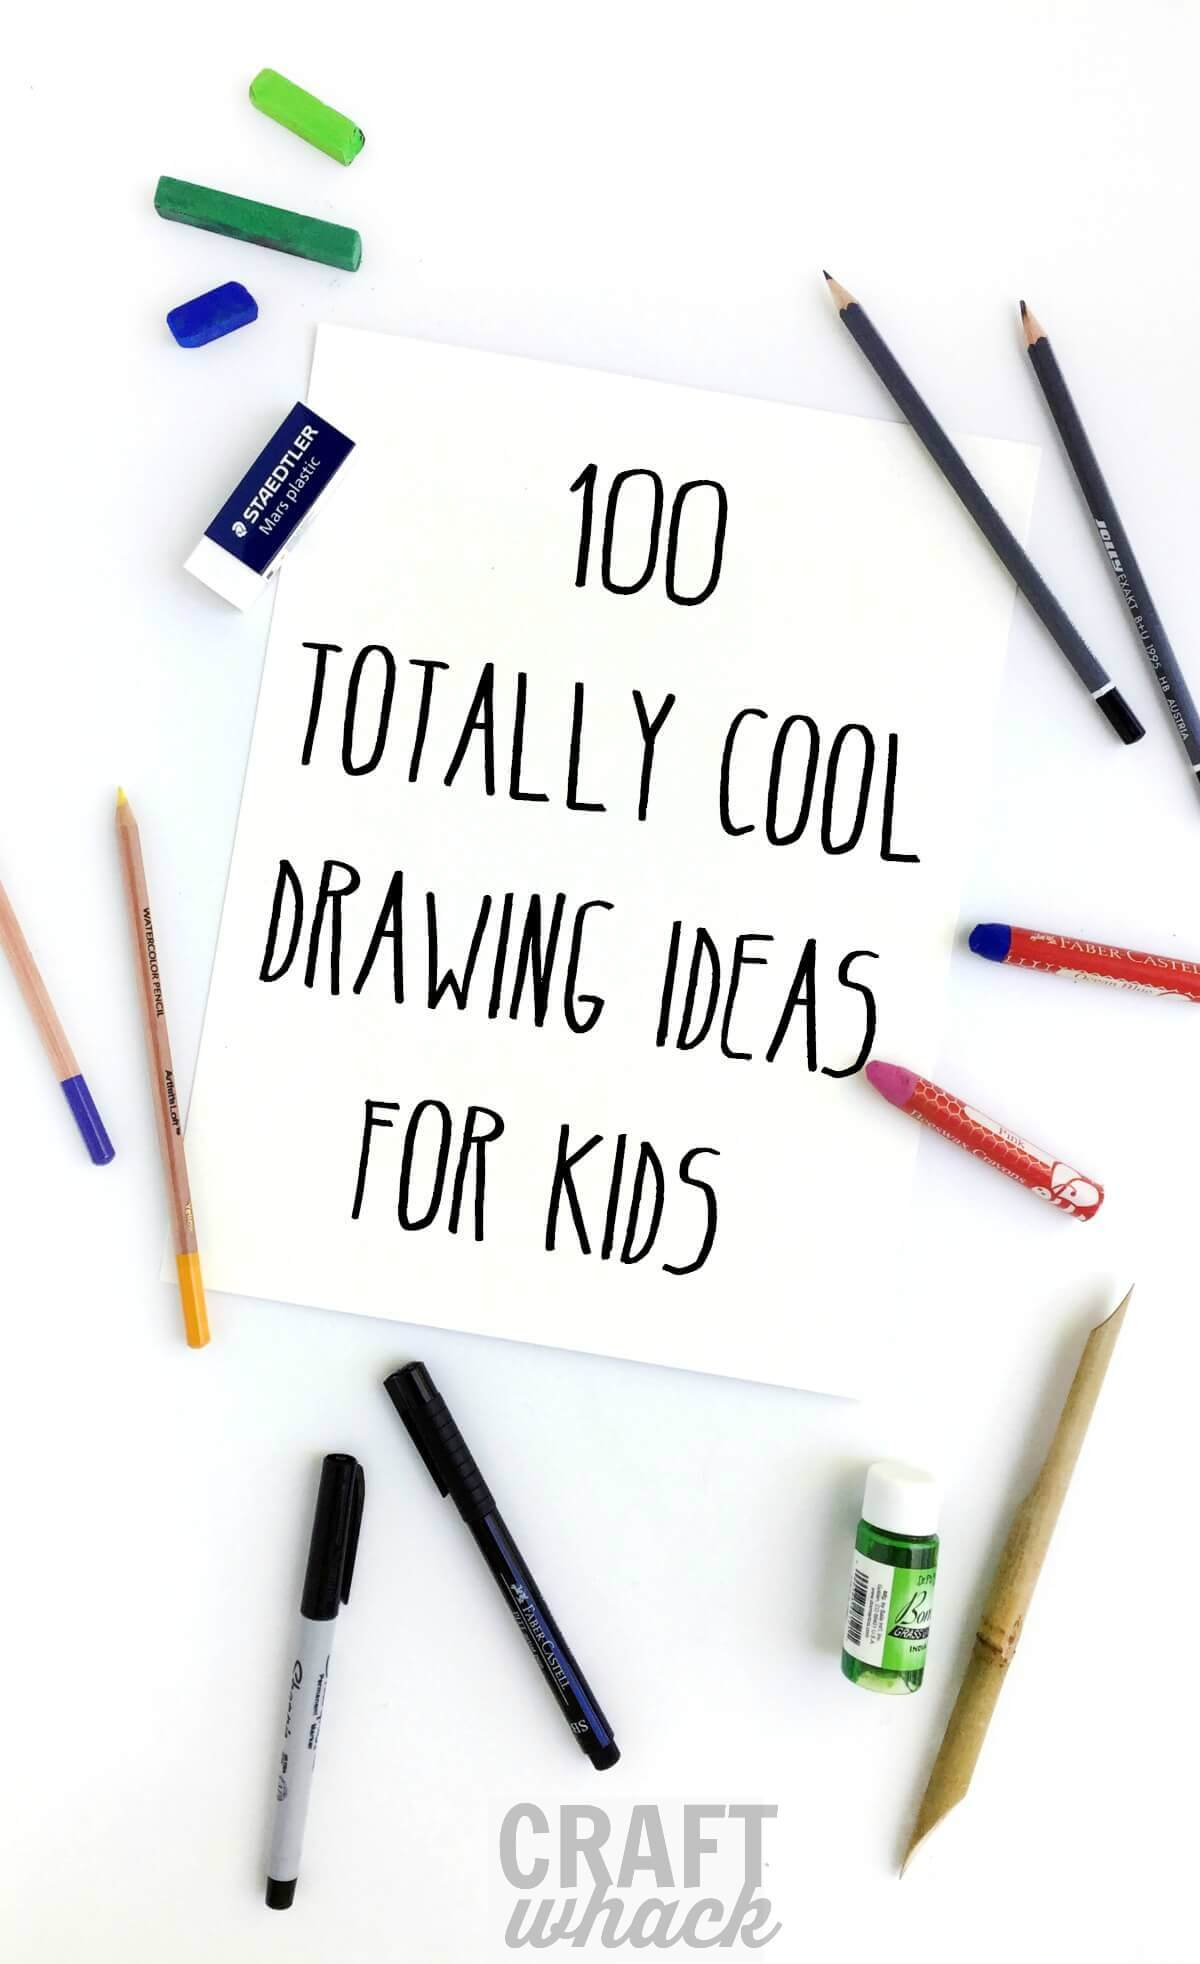 10 Unique Ideas For Kids To Draw 100 crazy cool drawing ideas for kids c2b7 craftwhack 2024